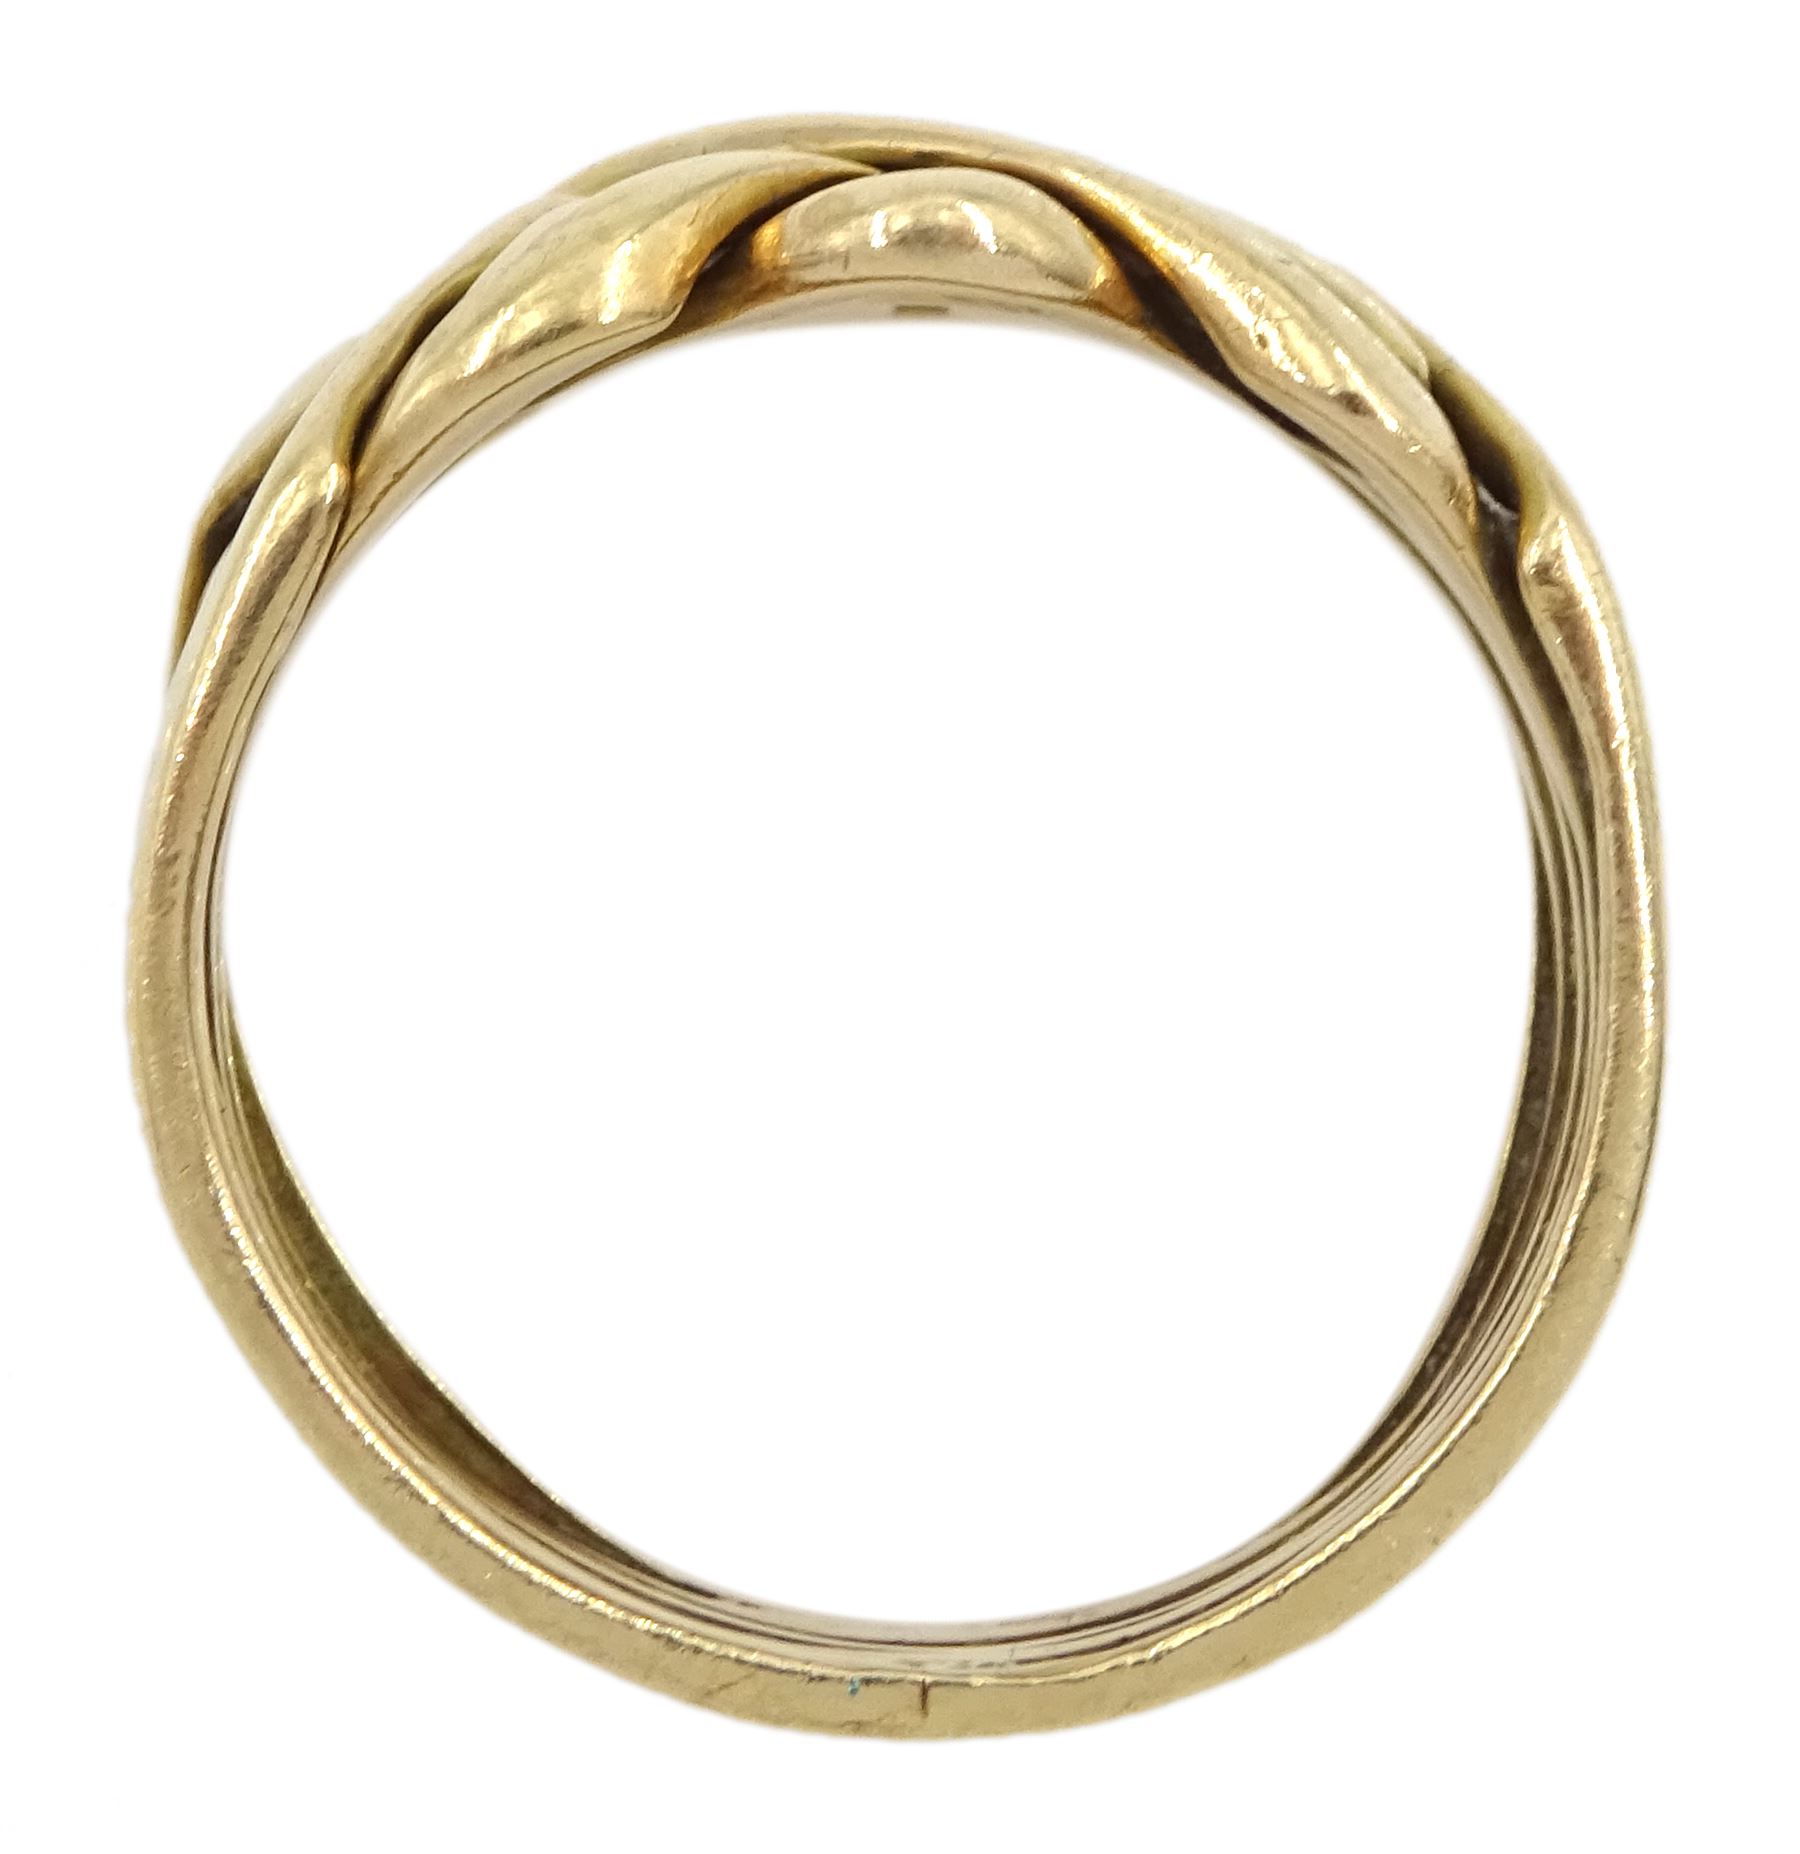 9ct gold puzzle ring - Image 4 of 4